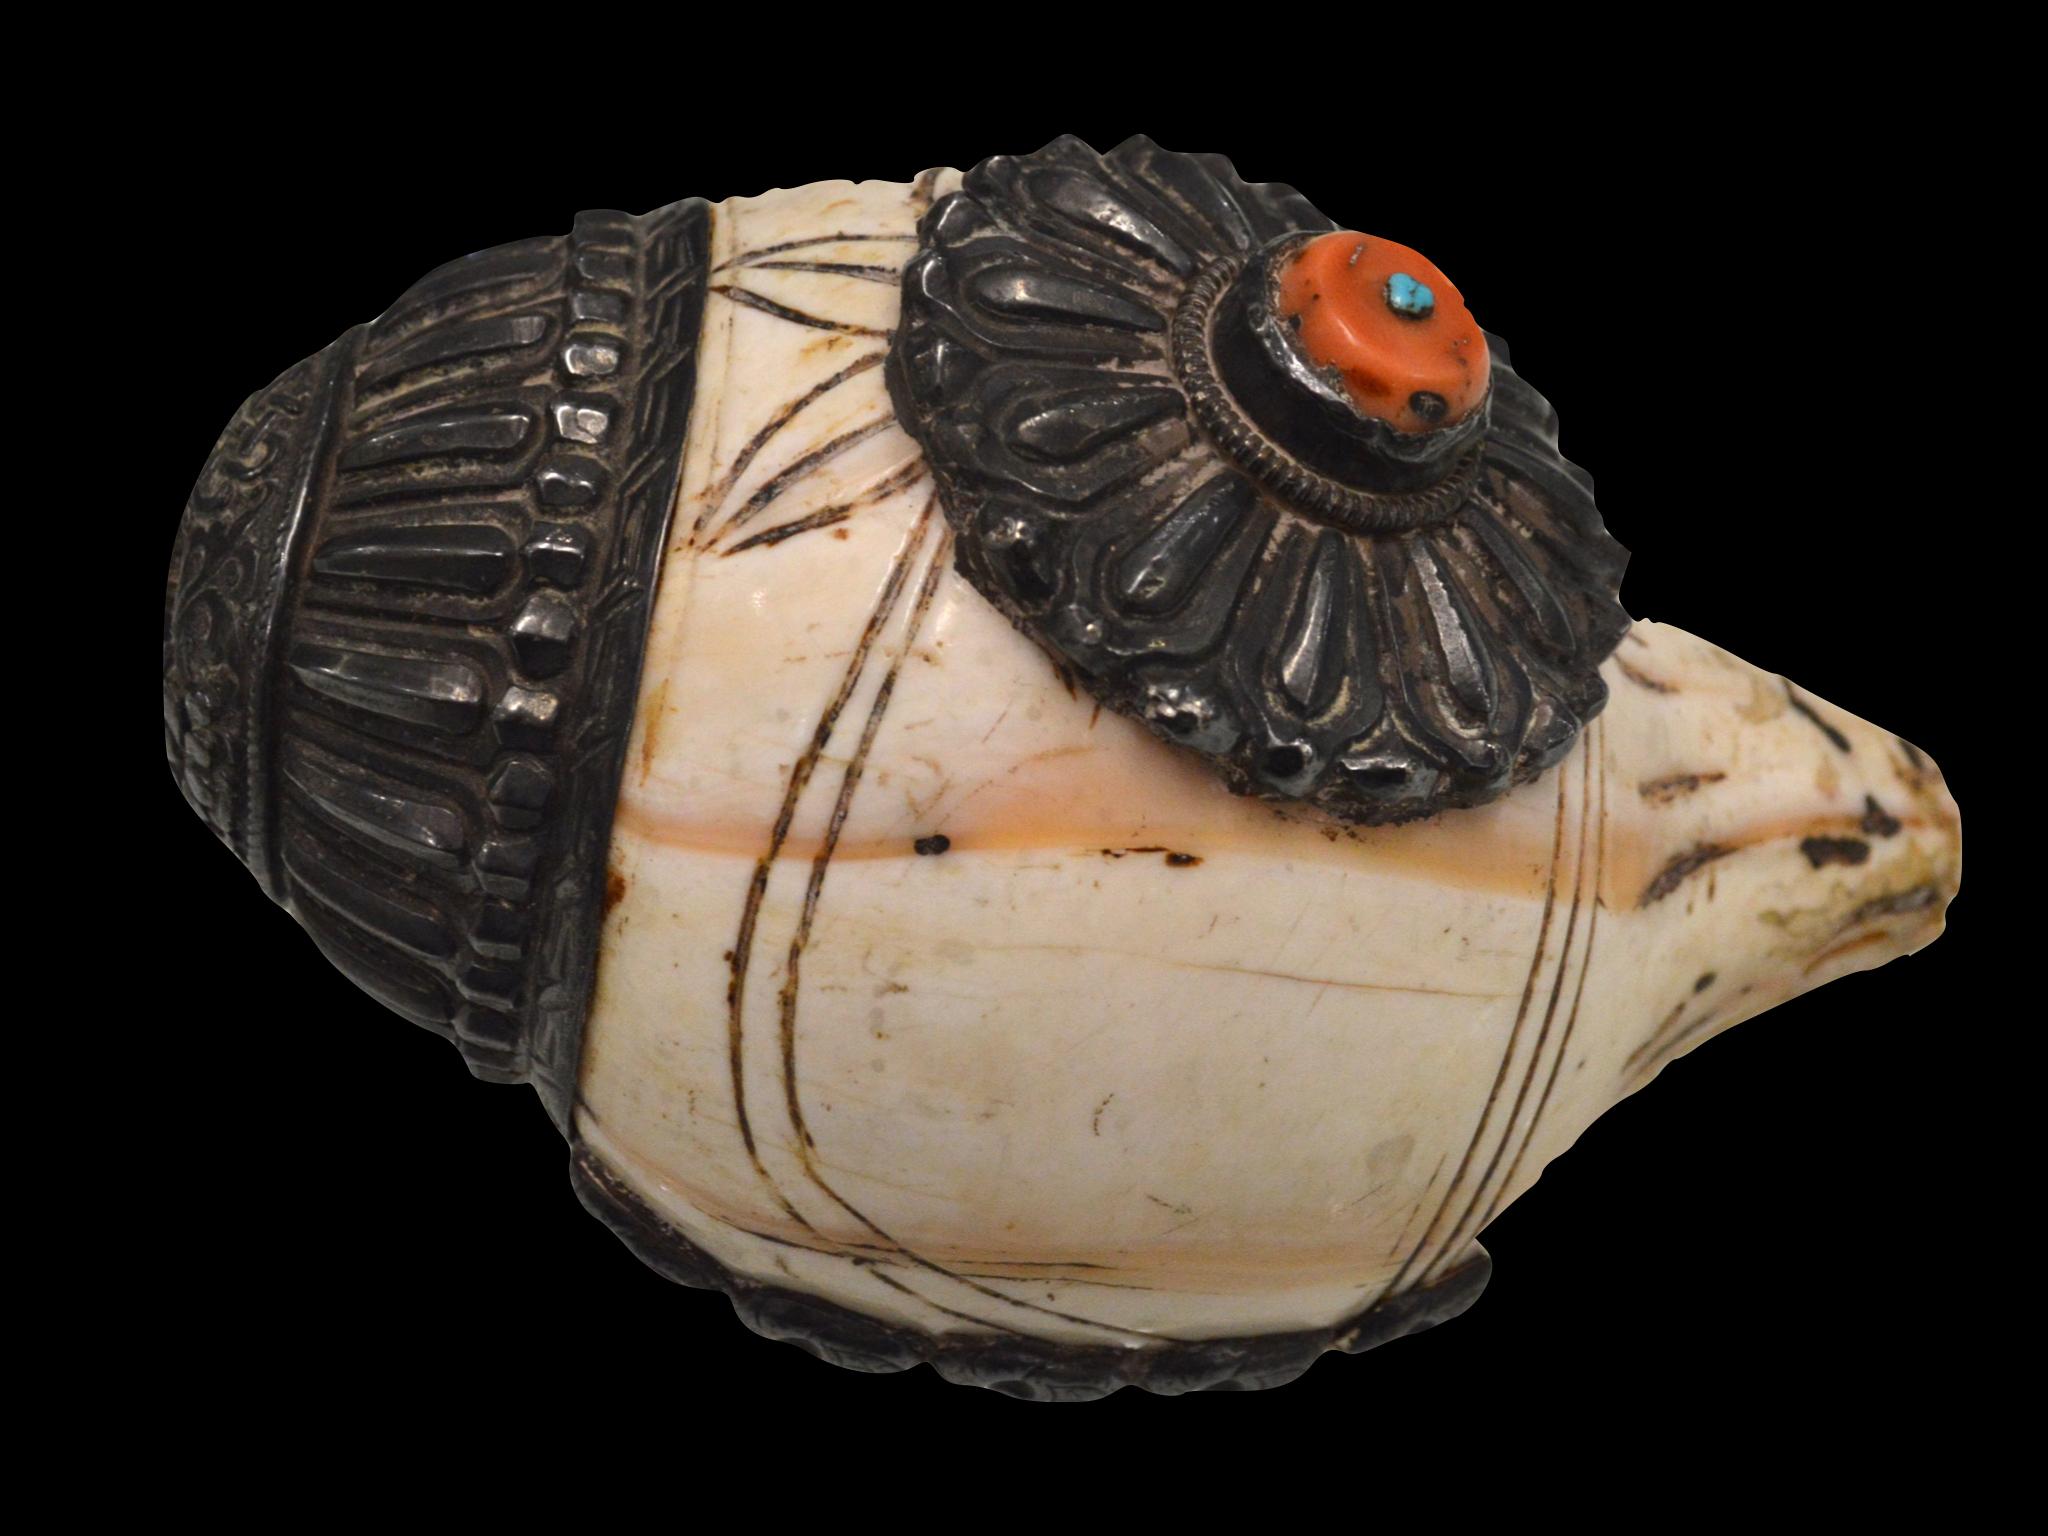 Conch shell recipient and container for holy water used in ceremonies. Known as “Buddha ears”, they were mounted as a sound instrument. Such shells are important ritual objects in Tibetan Buddhism. They are used as ceremonial trumpets in prayer